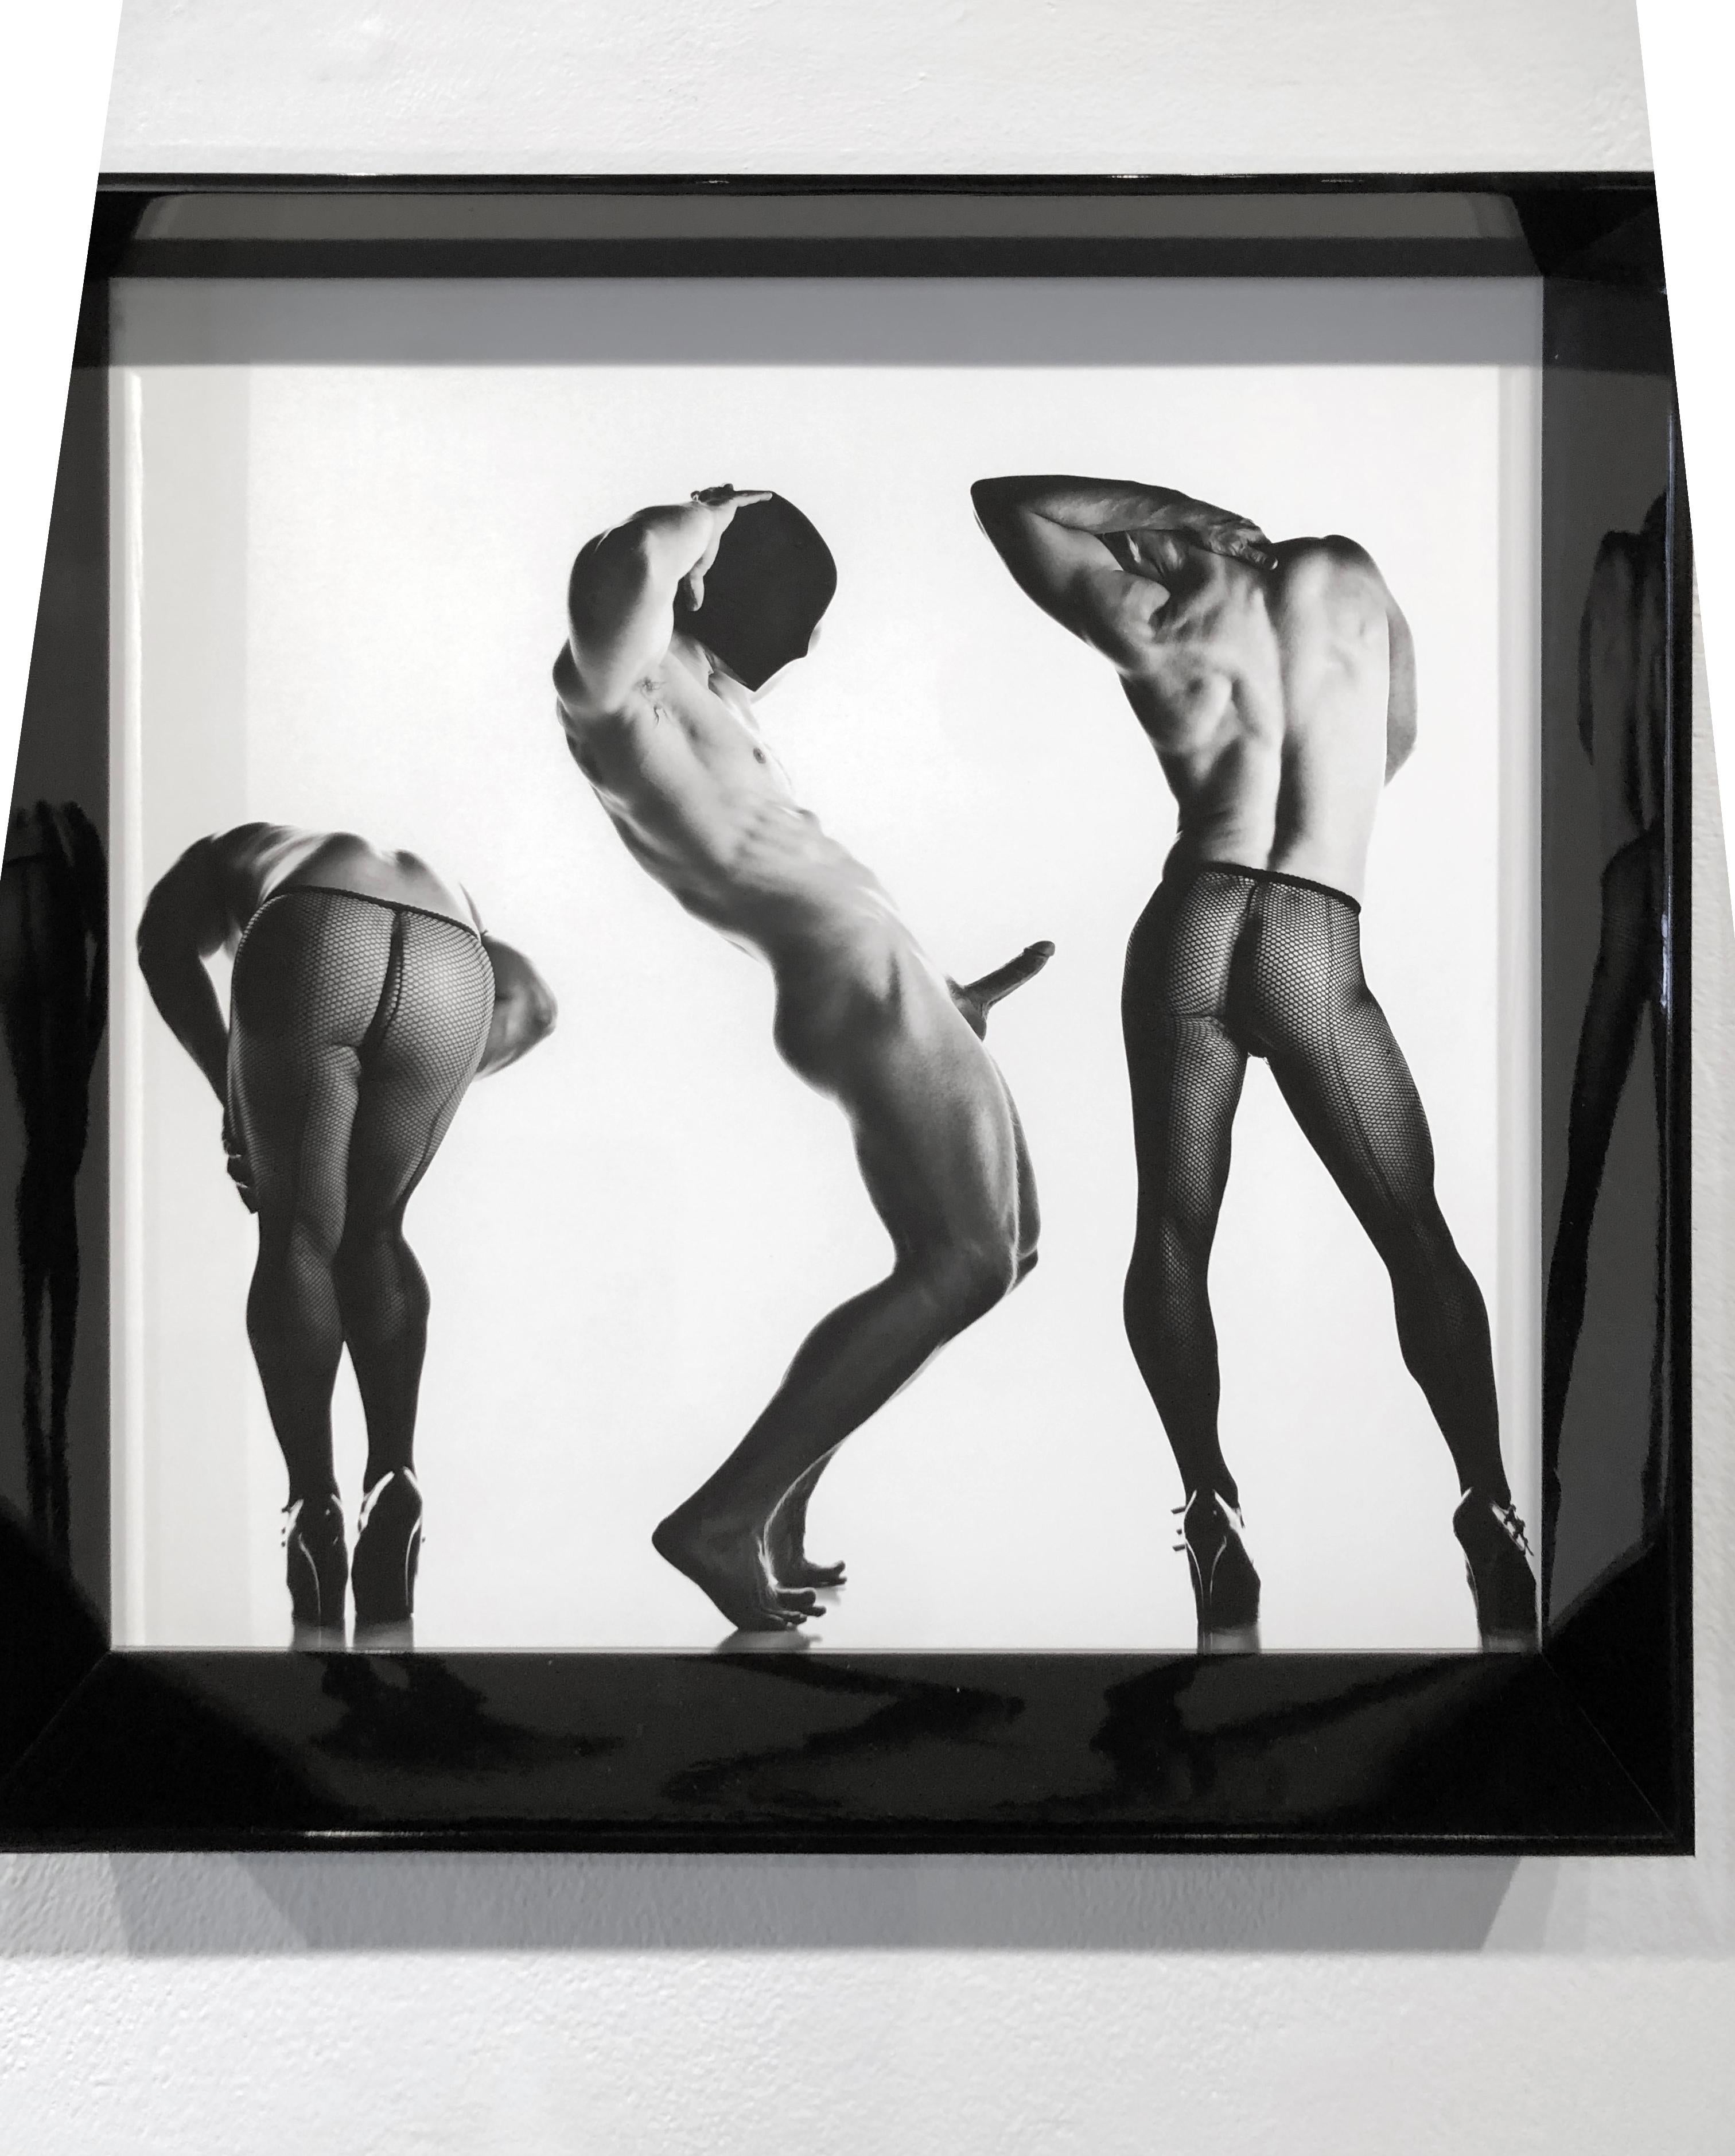 Sex 3 - Erotic Male Photo, Fishnet Stockings and High Heals, Matted and Framed 1